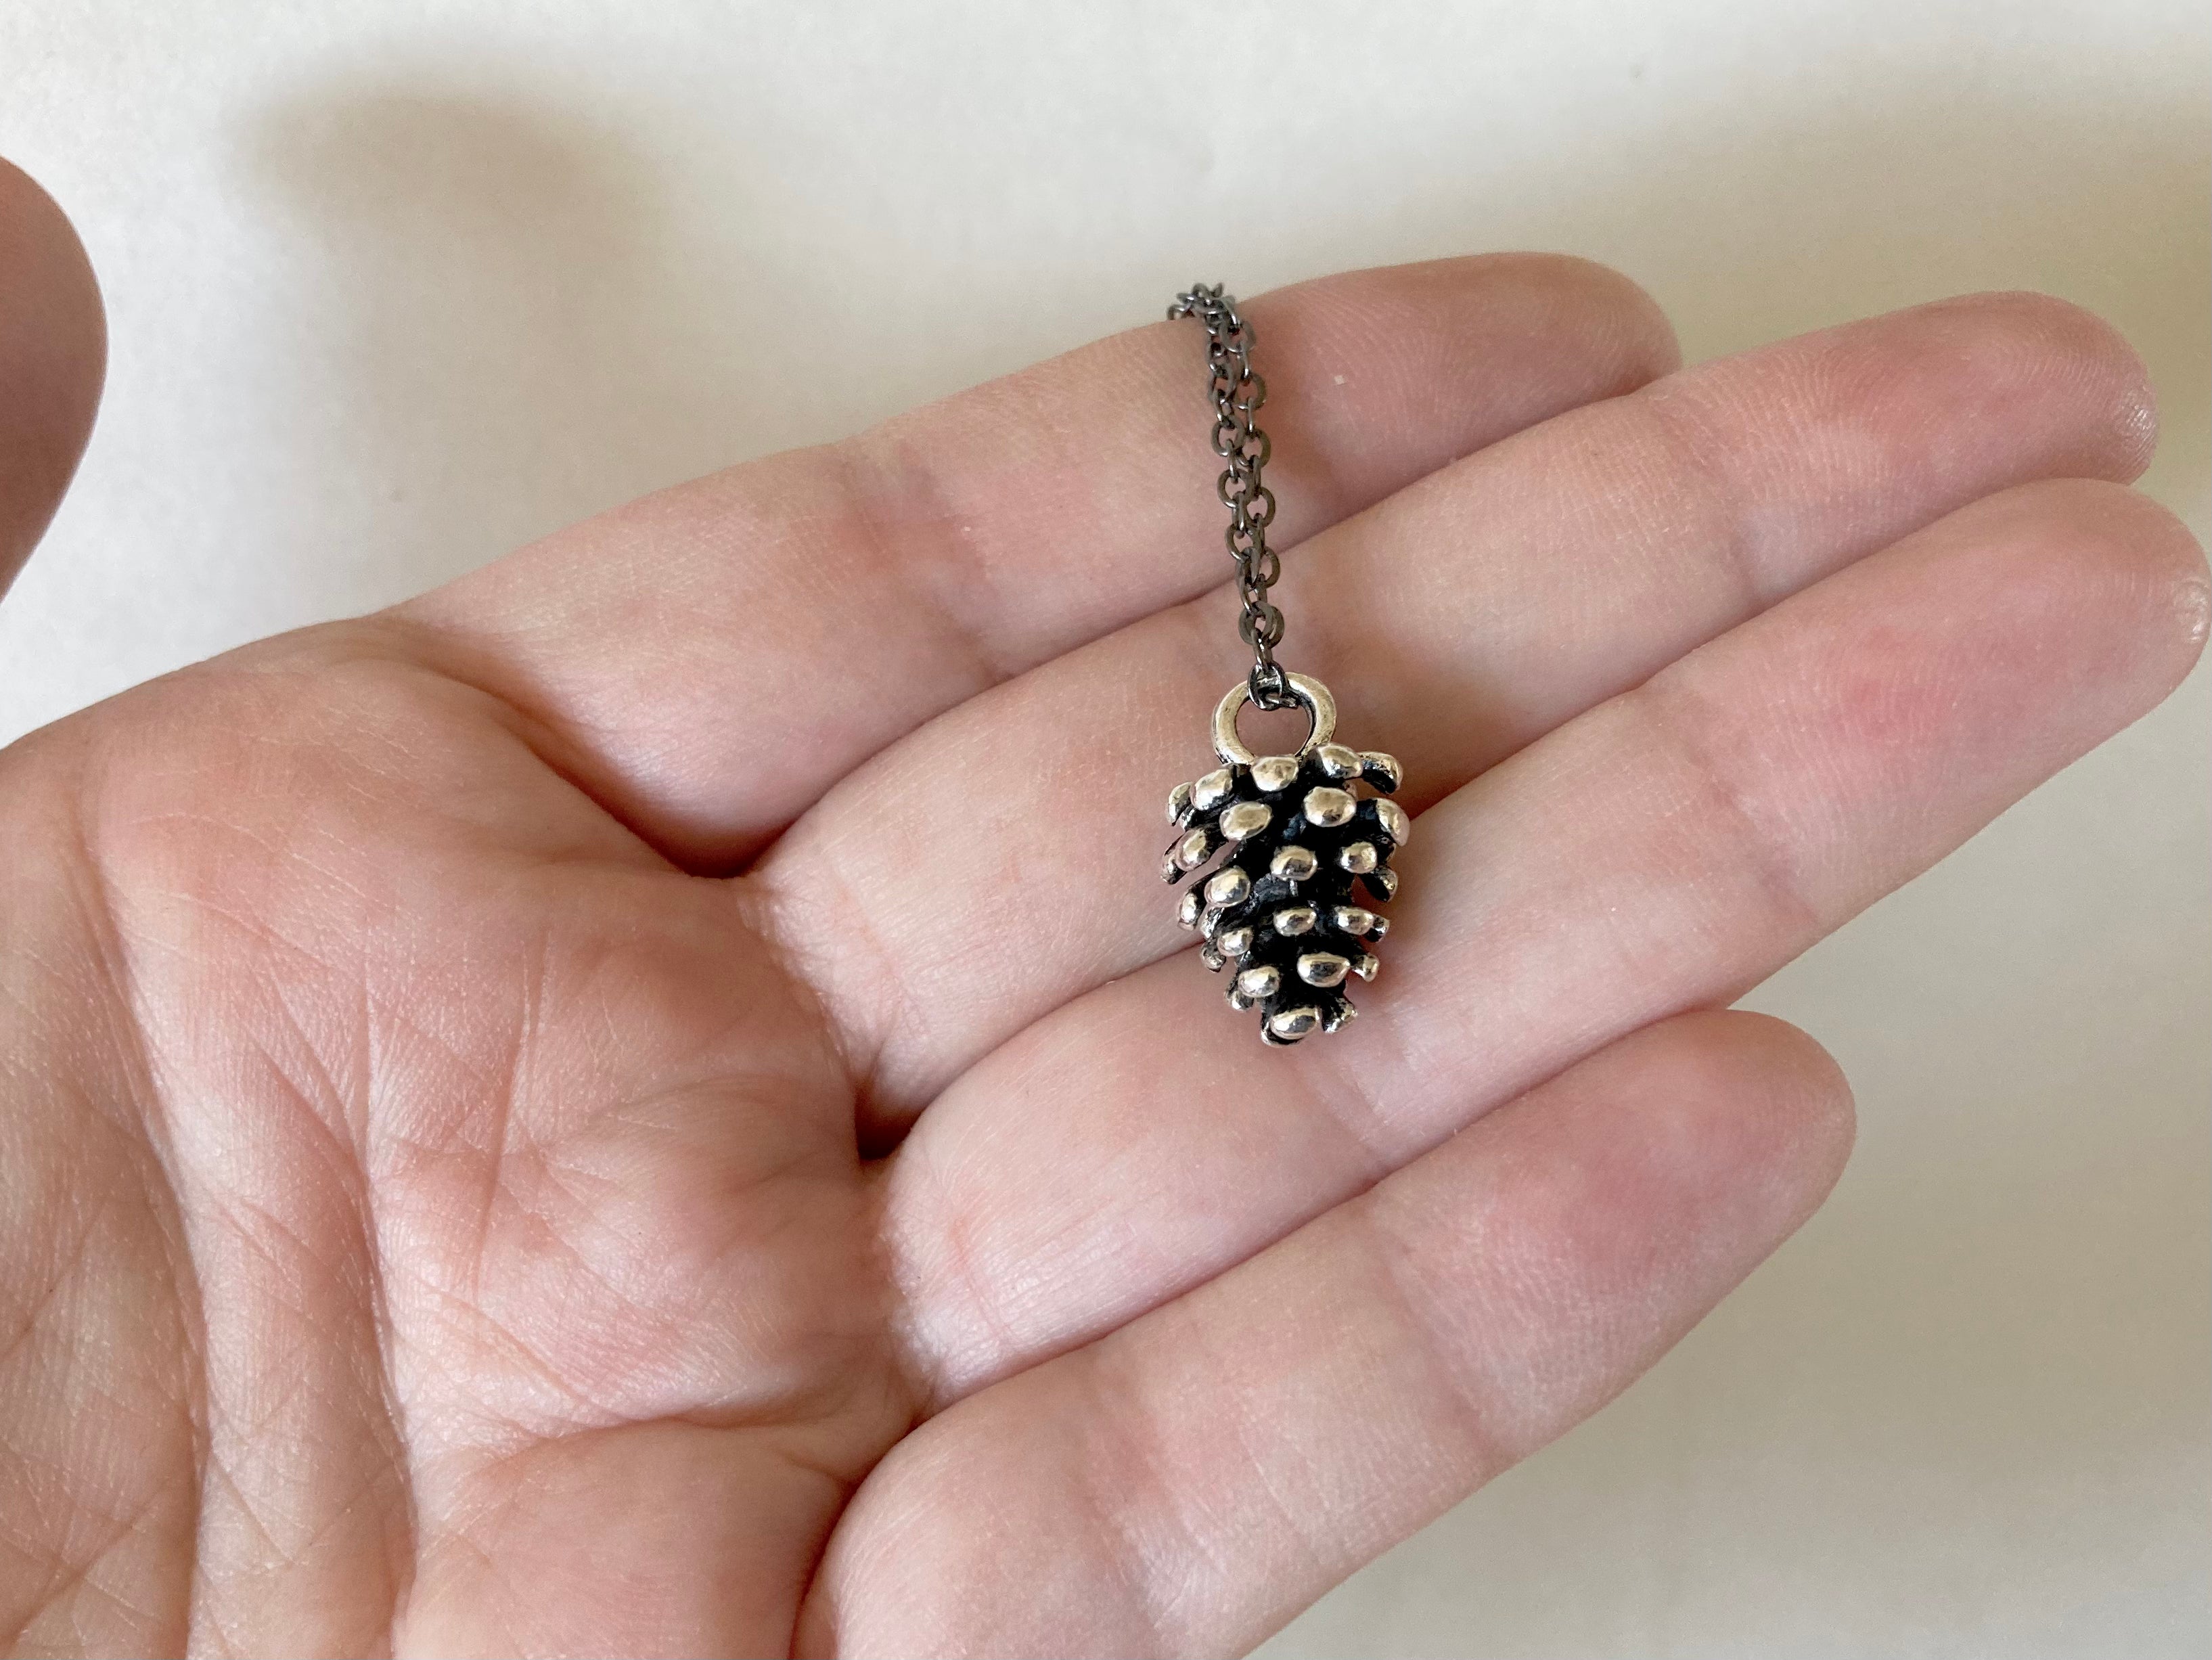 Wild Forest Pinecone Necklace with Long Beaded Chain | Silver Fall Pine Cone Charm Jewelry | Winter Holiday Pendant Gift